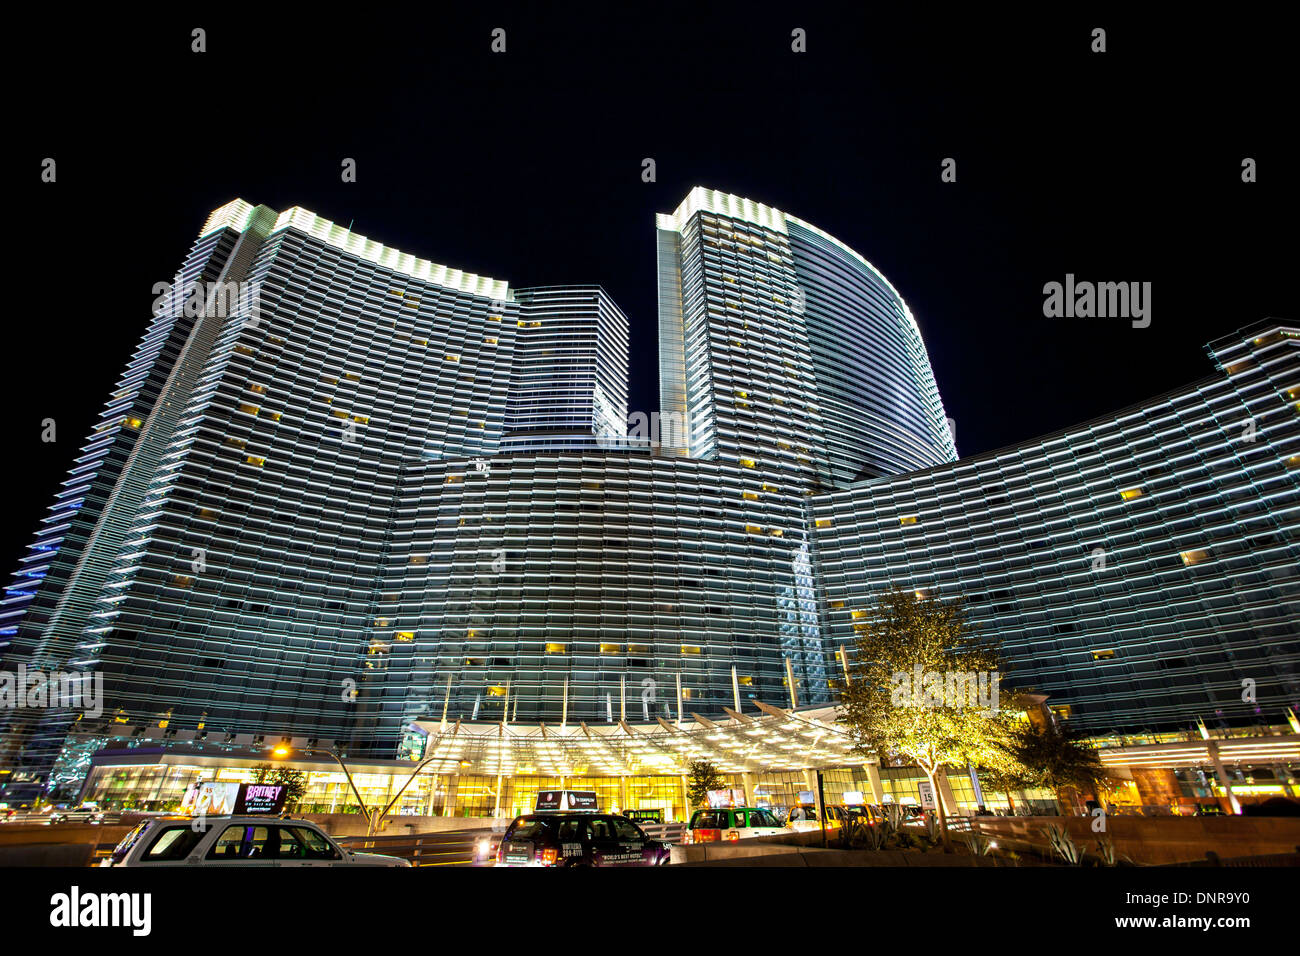 The Aria Hotel & Casino in Las Vegas pictured at night Stock Photo - Alamy